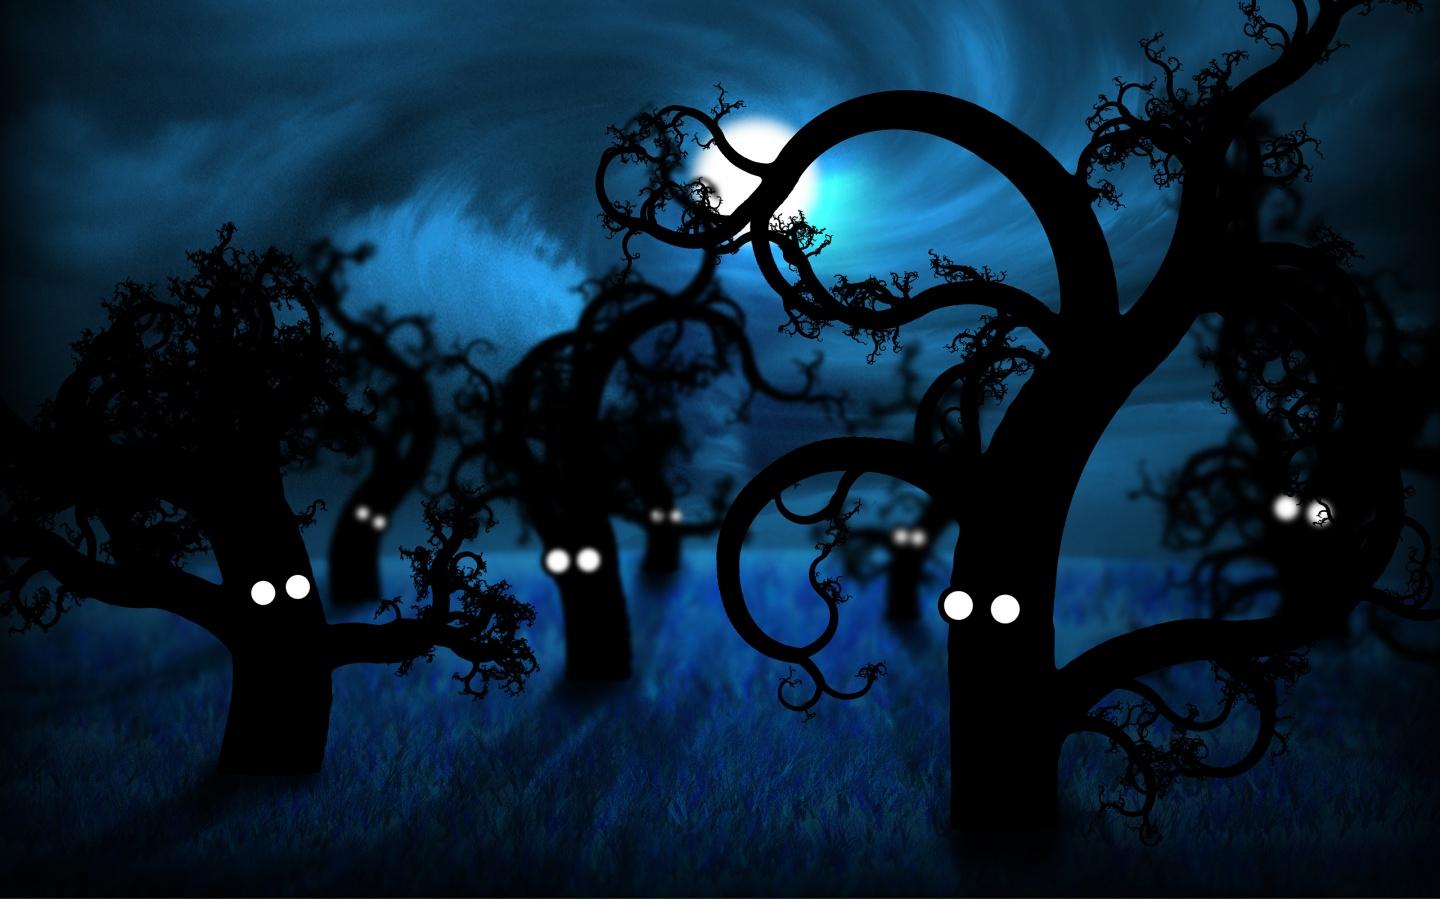 Forest Midnight Wallpaper in jpg format for free download